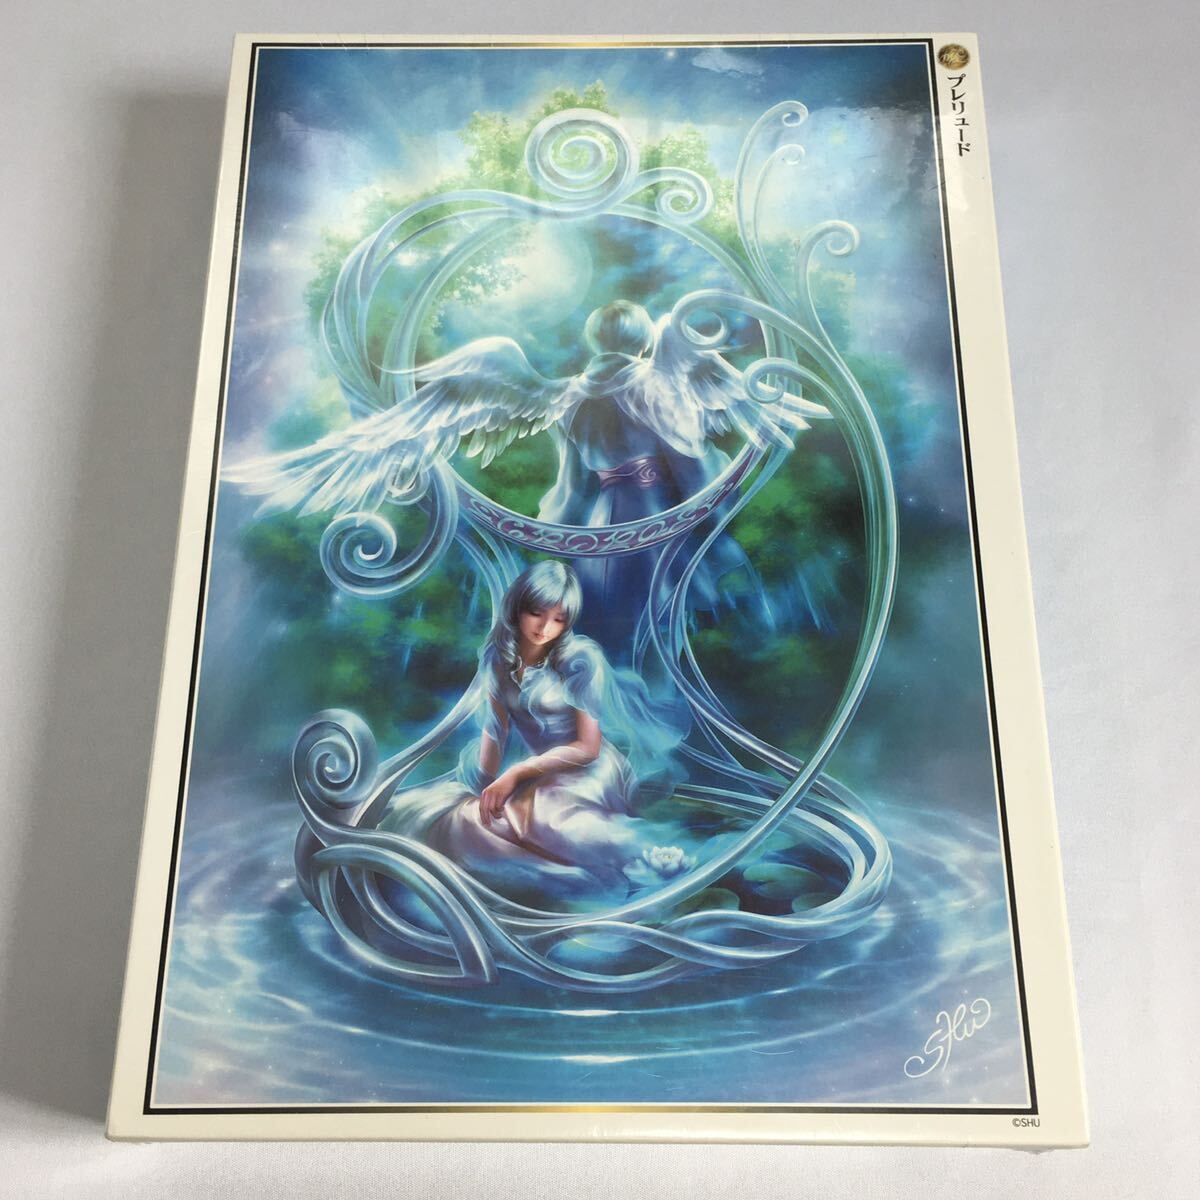 [ unopened goods ] Prelude Art by SHU shines 1000 piece jigsaw puzzle APPLEONE graphic illusion ..1000-607 1000 puzzle records out of production beautiful 